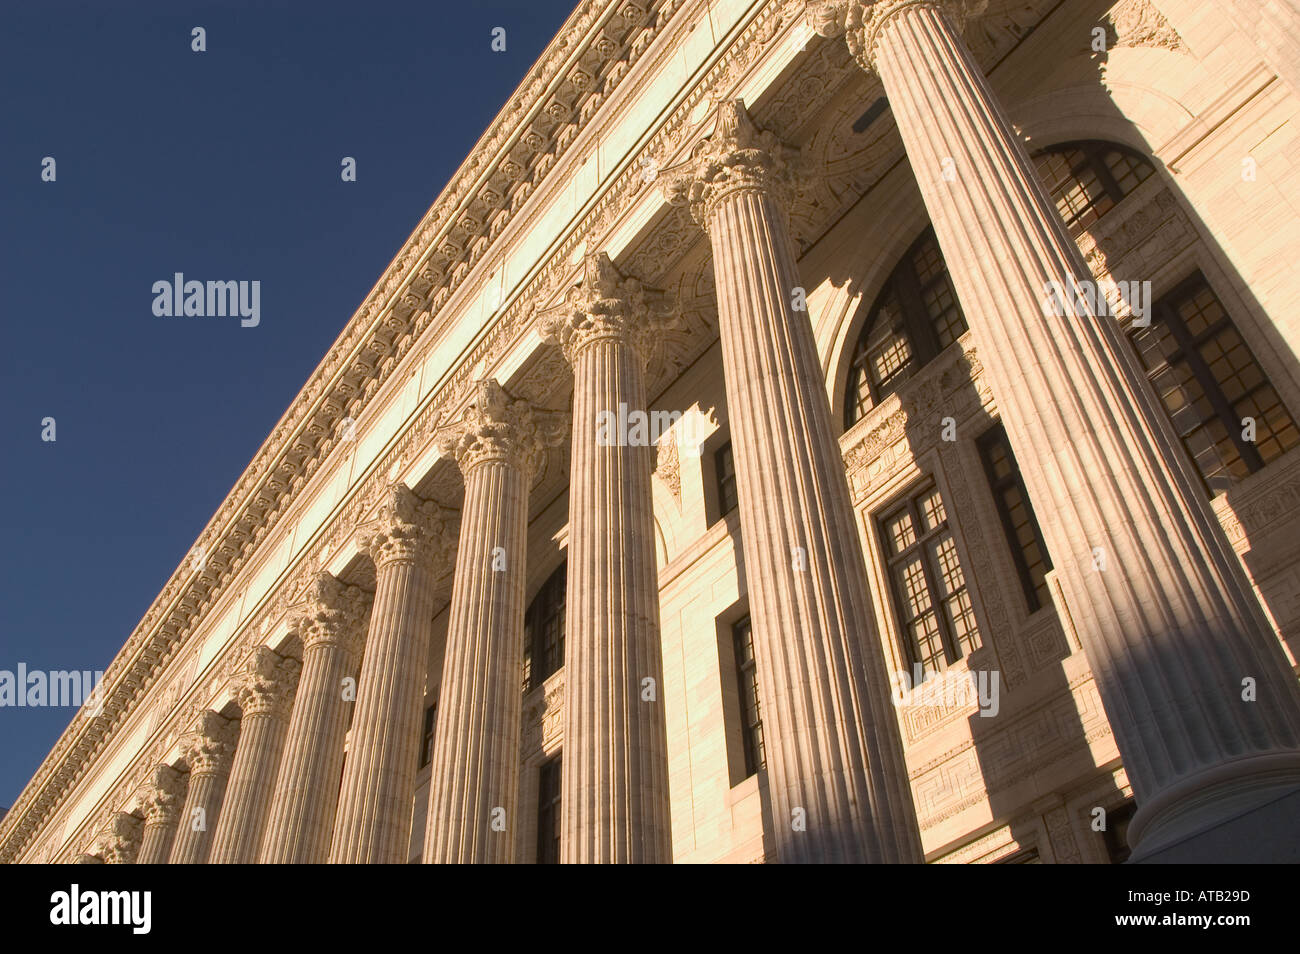 Longest colonnade of Corinthian columns in USA at The State Education Building Albany New York Stock Photo